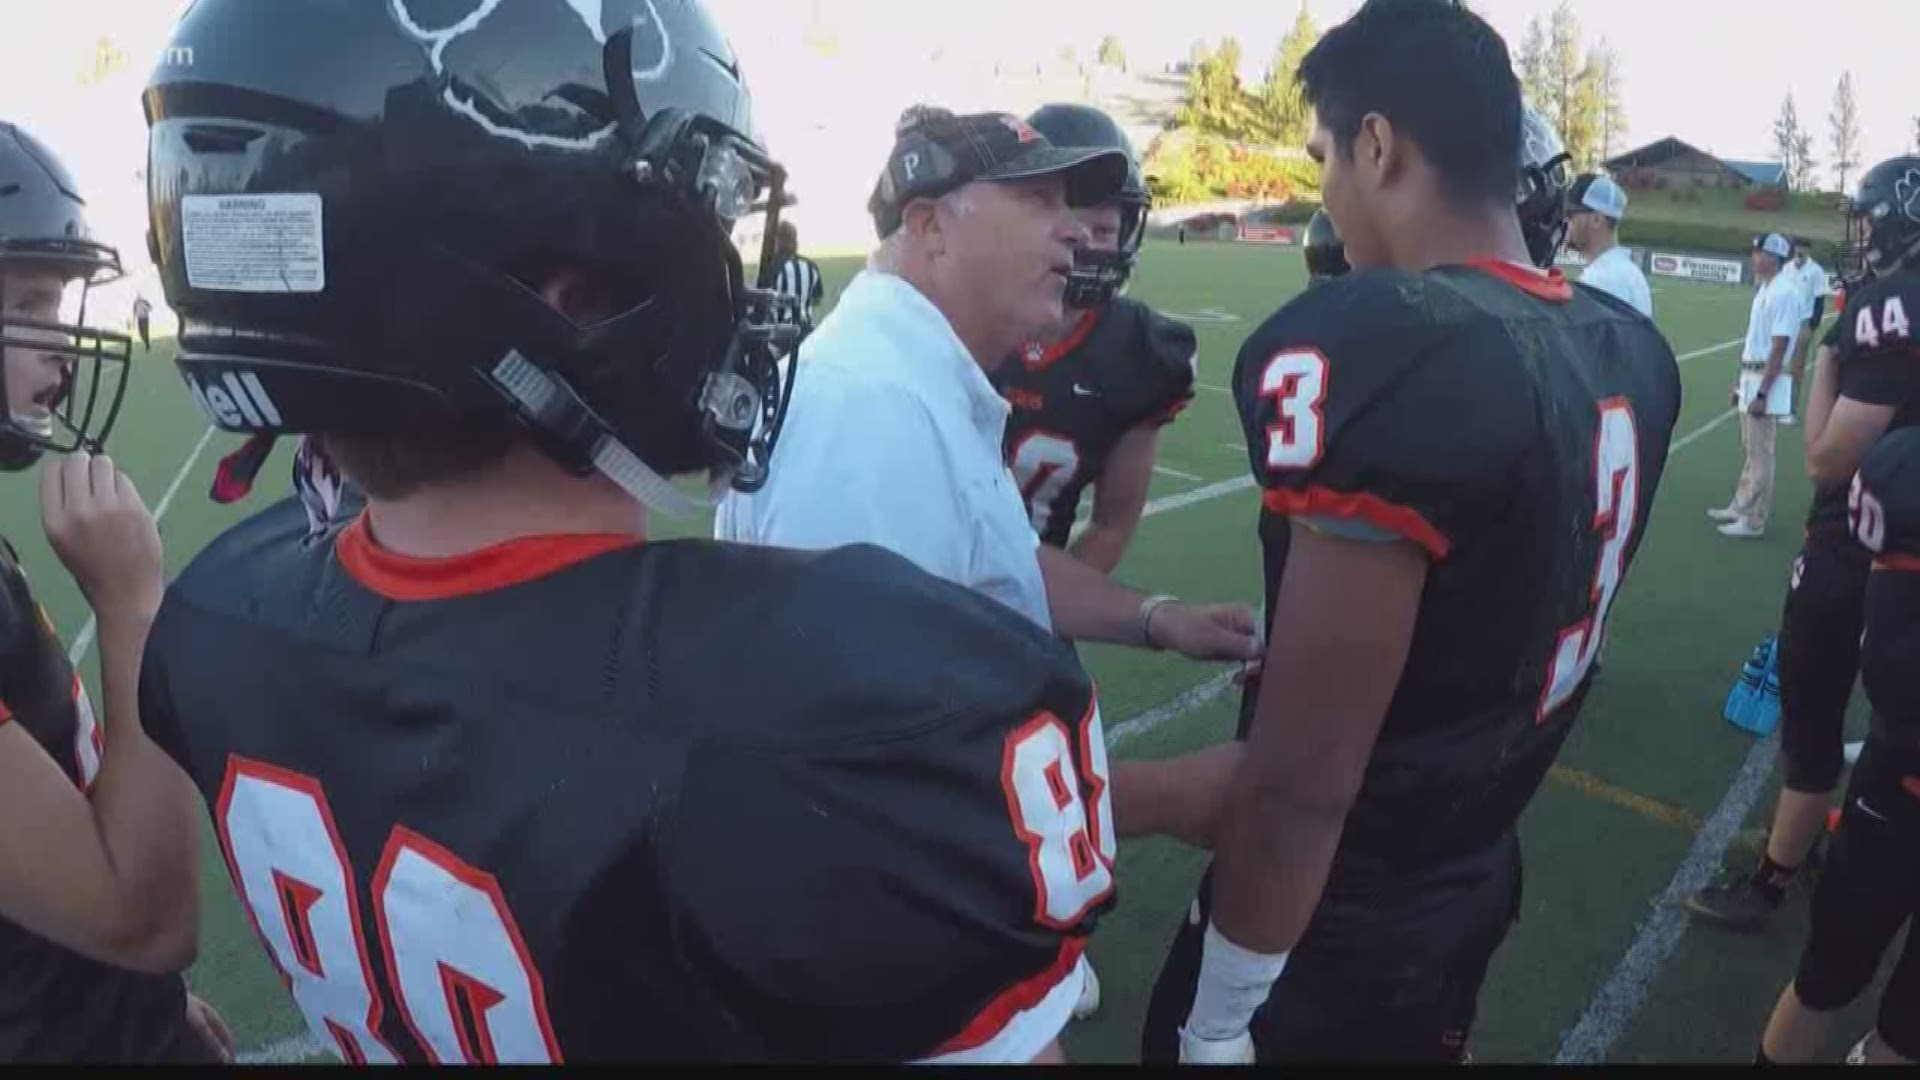 Hear what coach Dave Hughes has to say on the sidelines during Lewis & Clark's 42-10 win over Rogers.